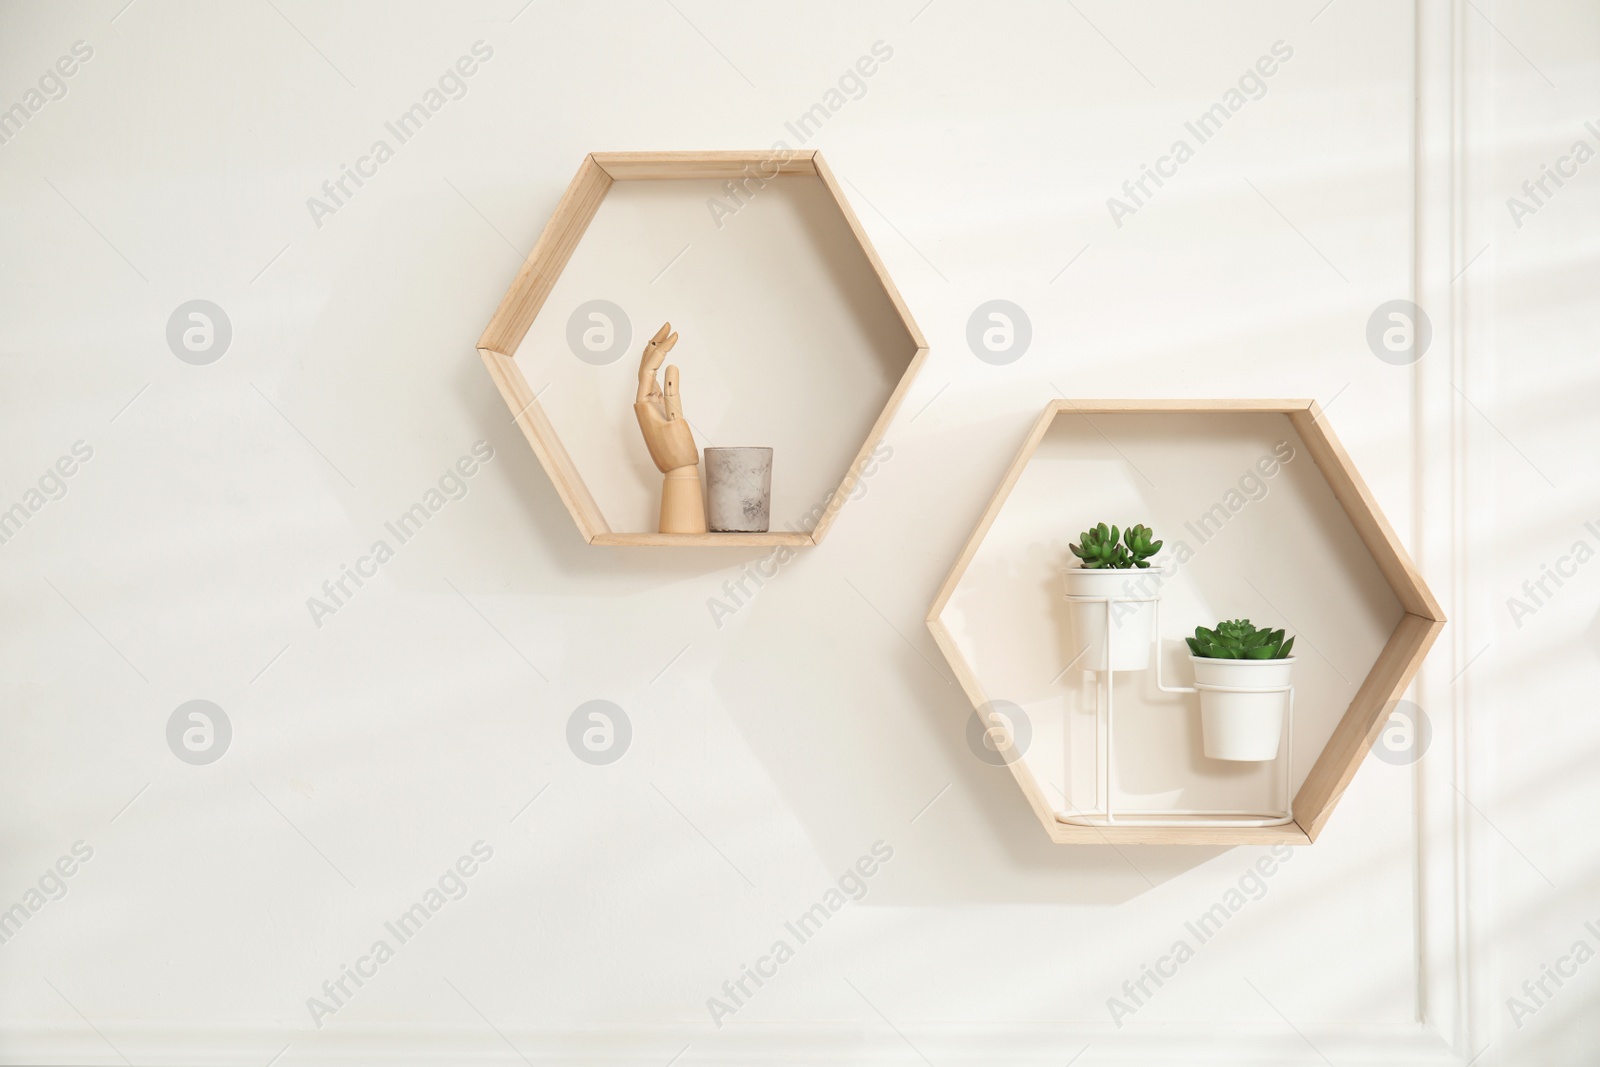 Photo of Honeycomb shaped shelves with decorative elements and houseplants on white wall